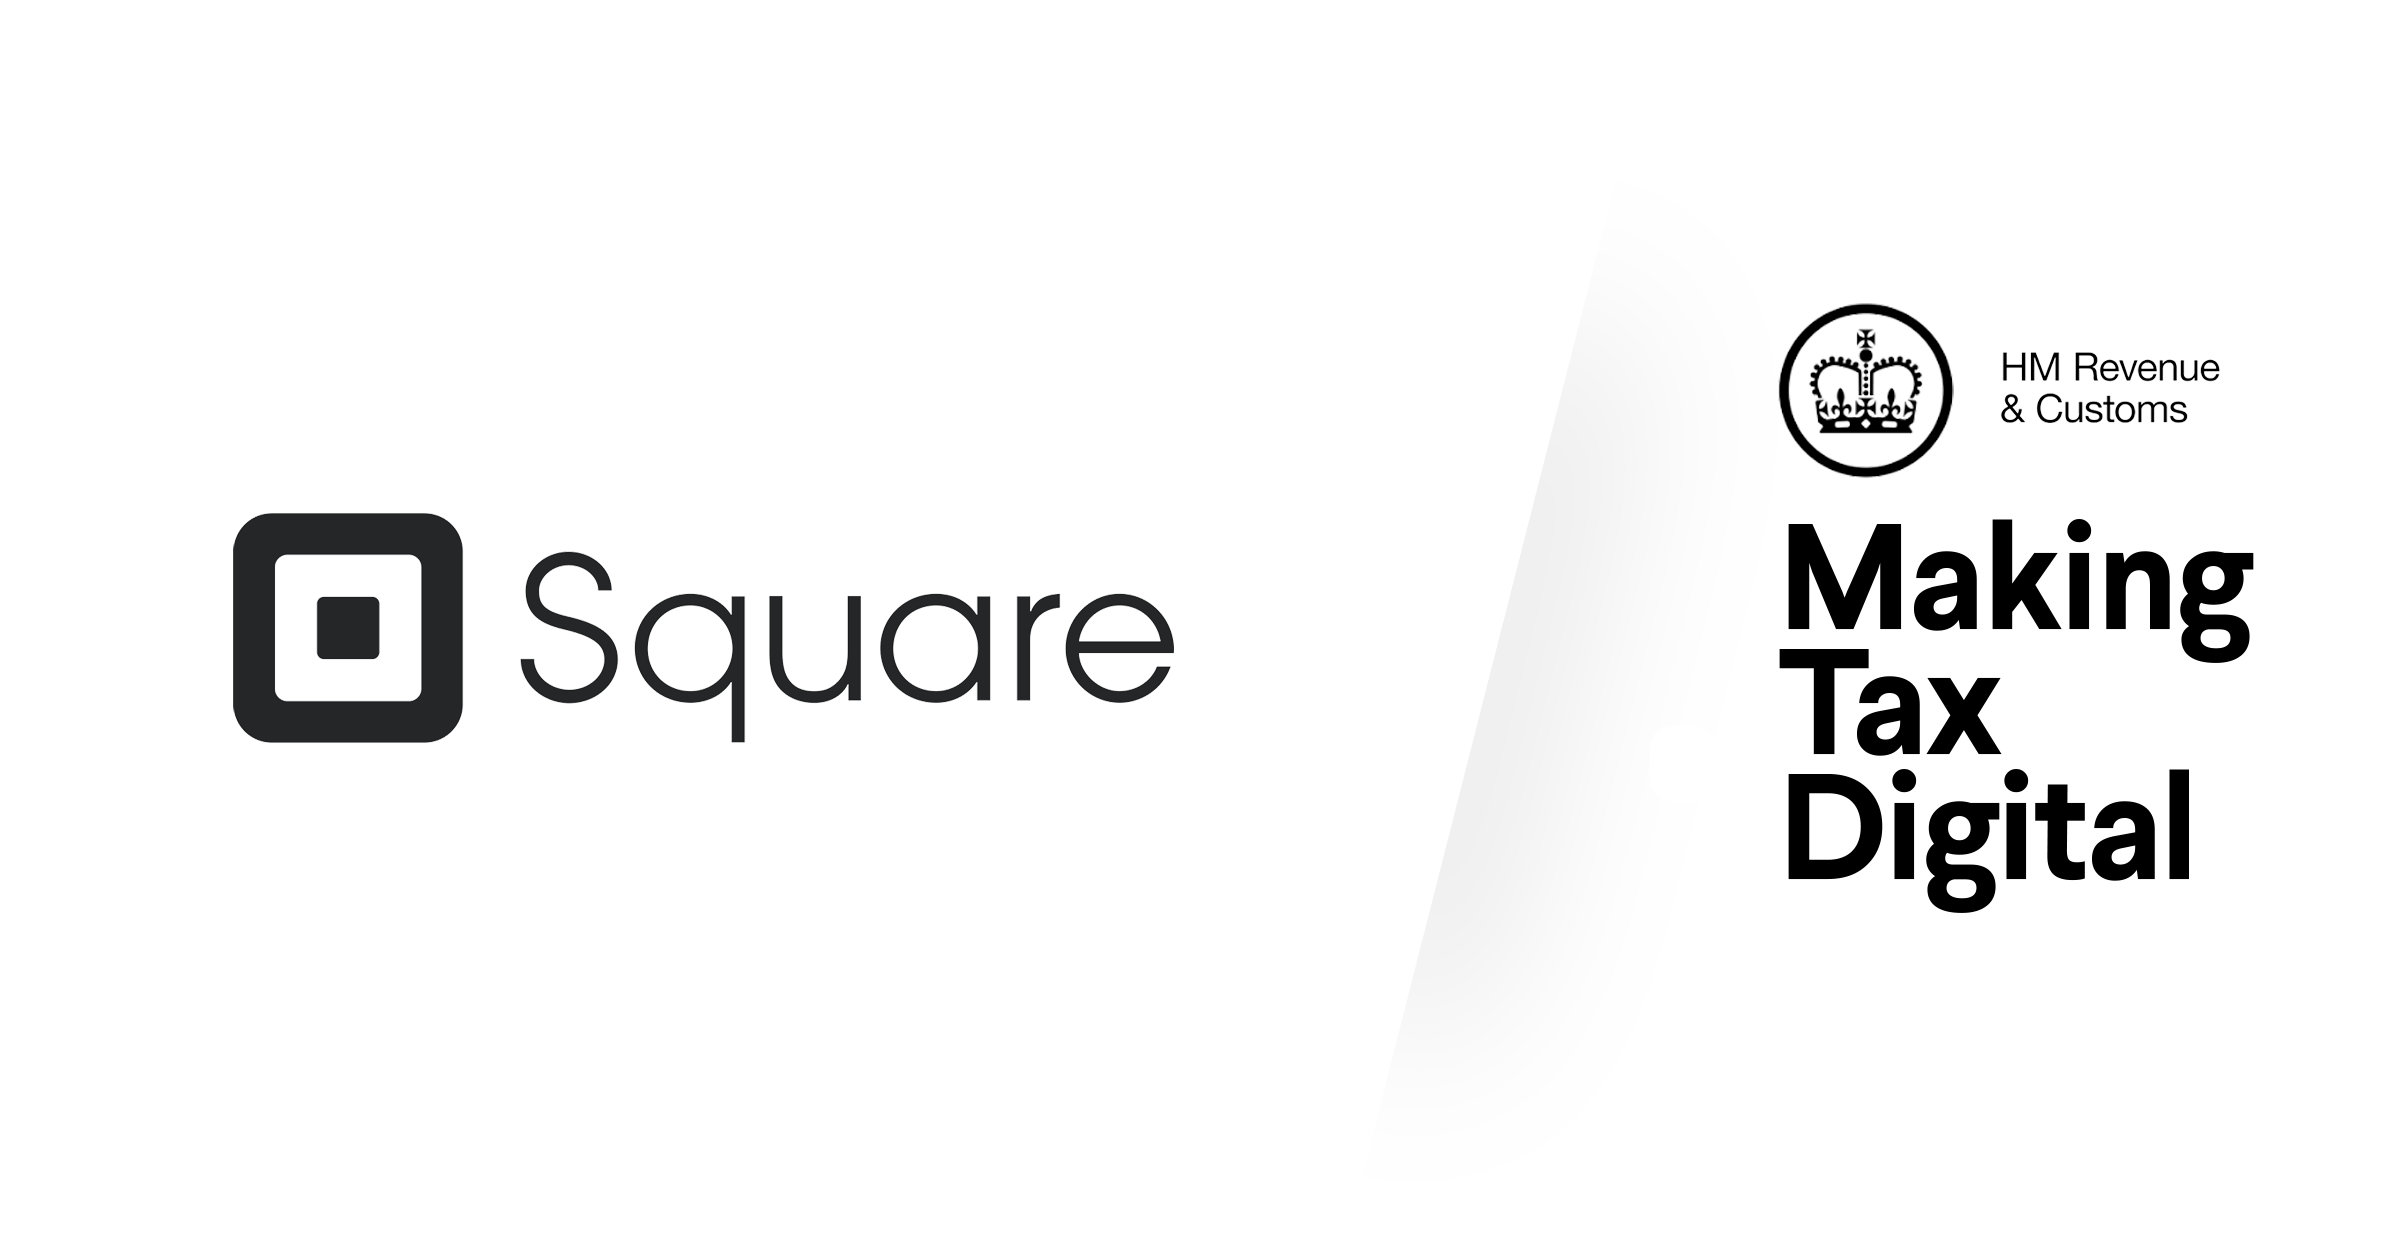 Make Tax Digital for Square Sellers